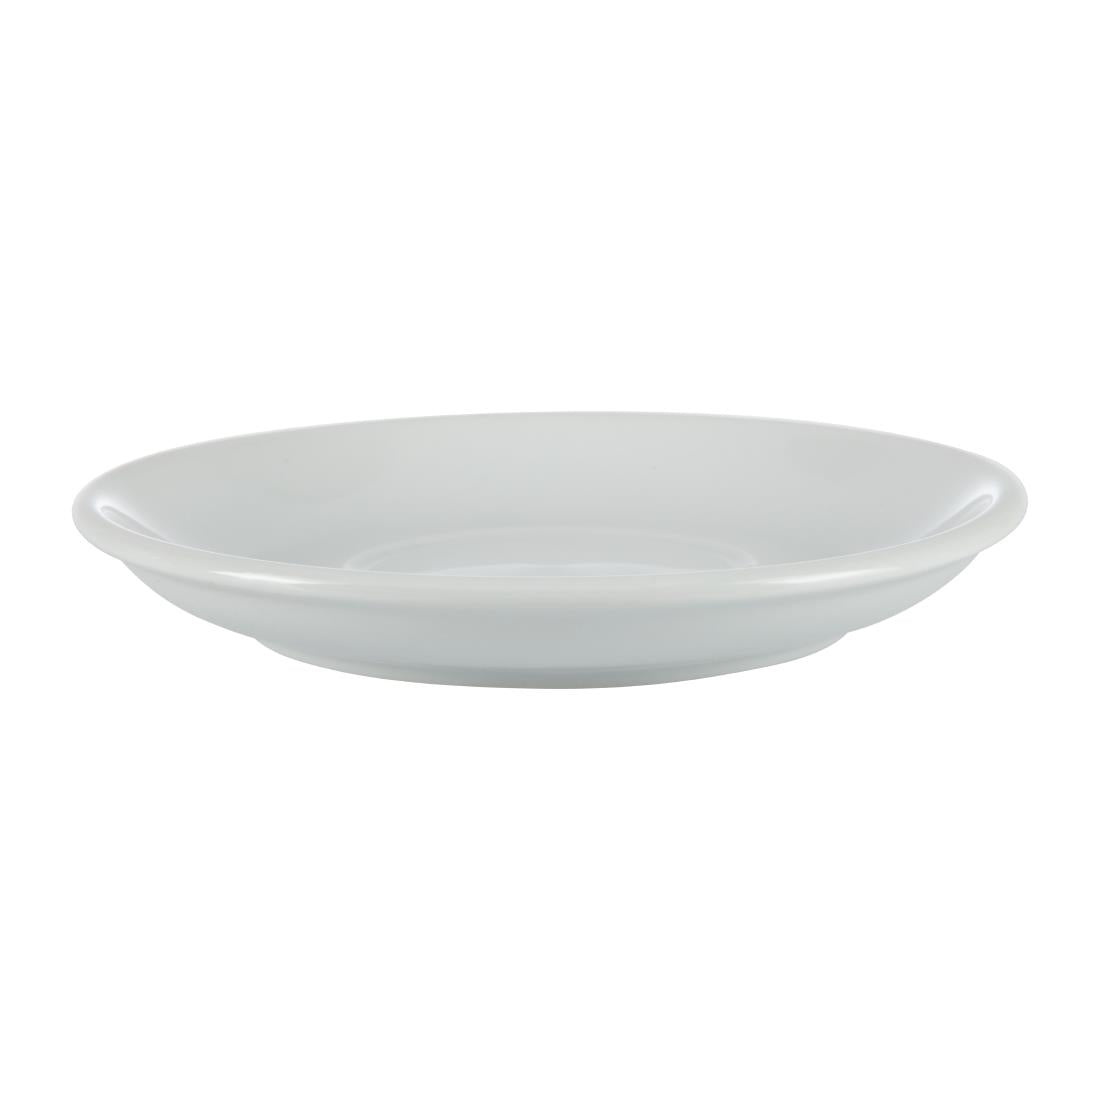 Athena Hotelware Saucers 145mm (Pack of 24) JD Catering Equipment Solutions Ltd